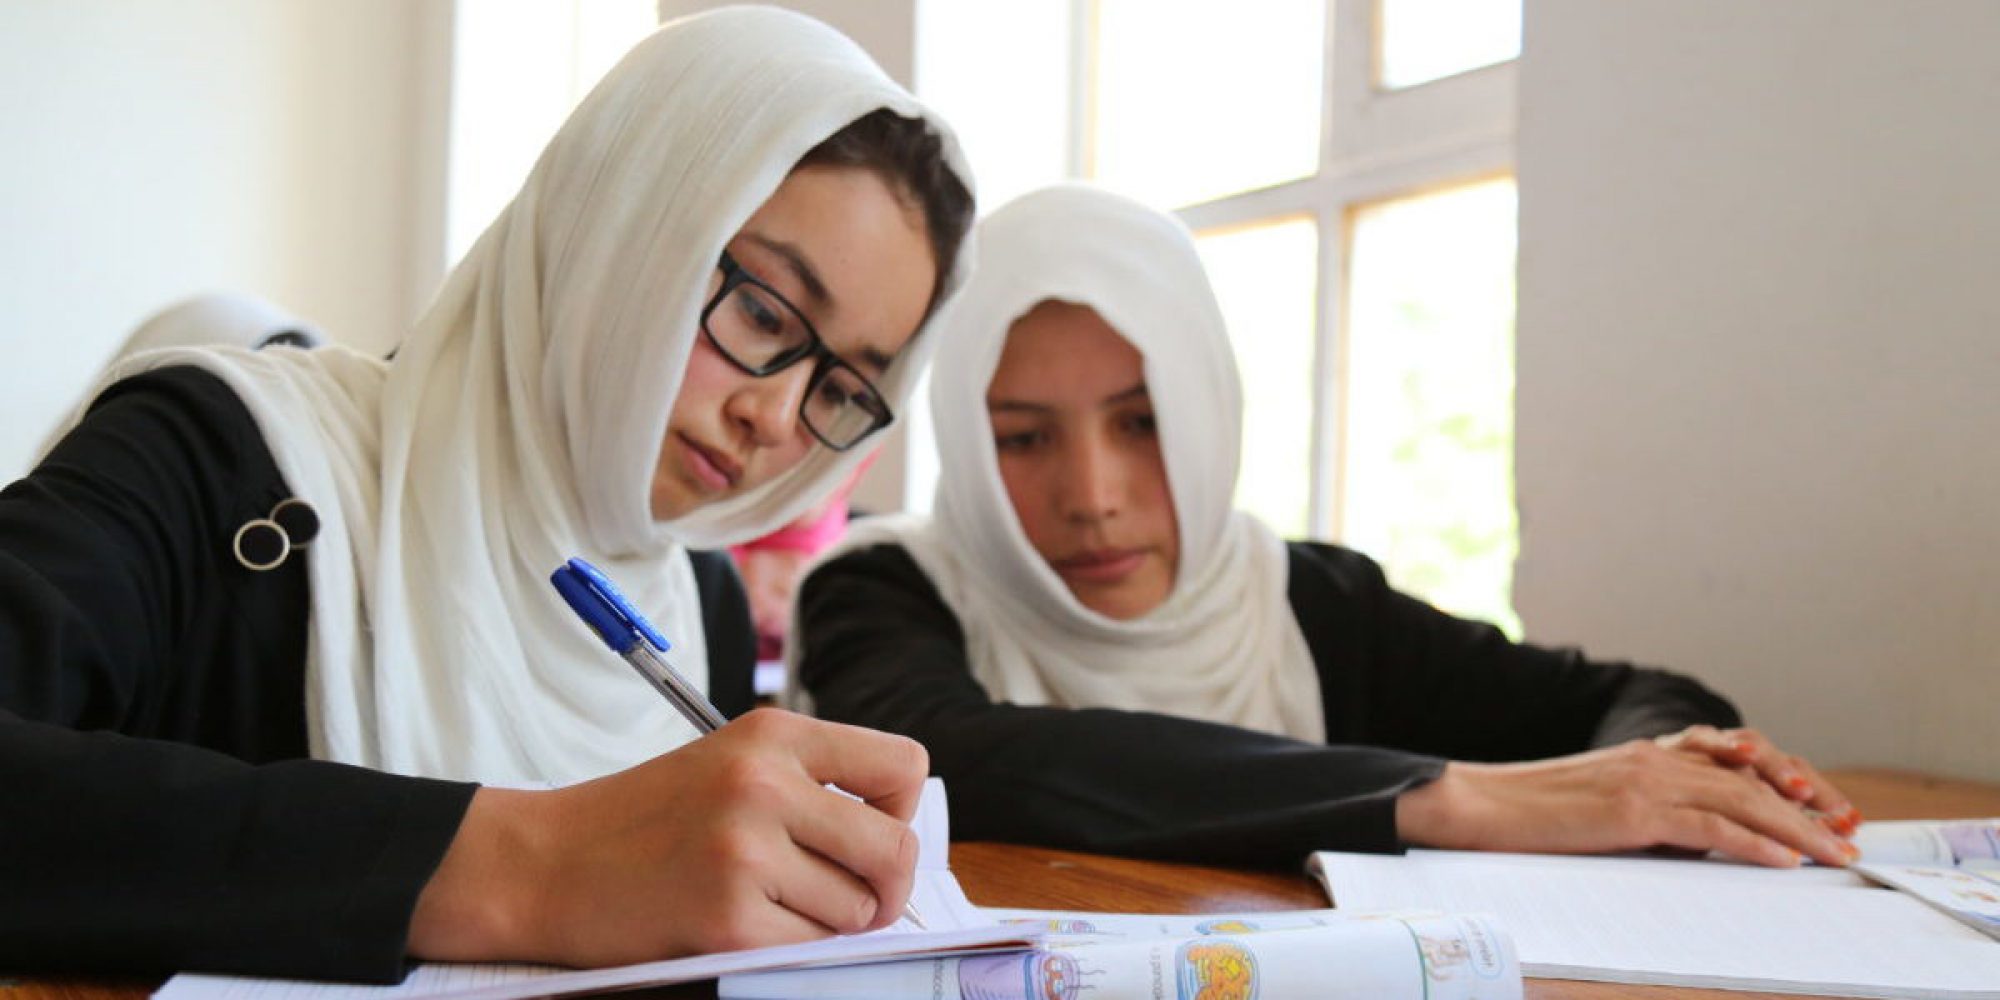 Girls attending JRS classes in Afghanistan.